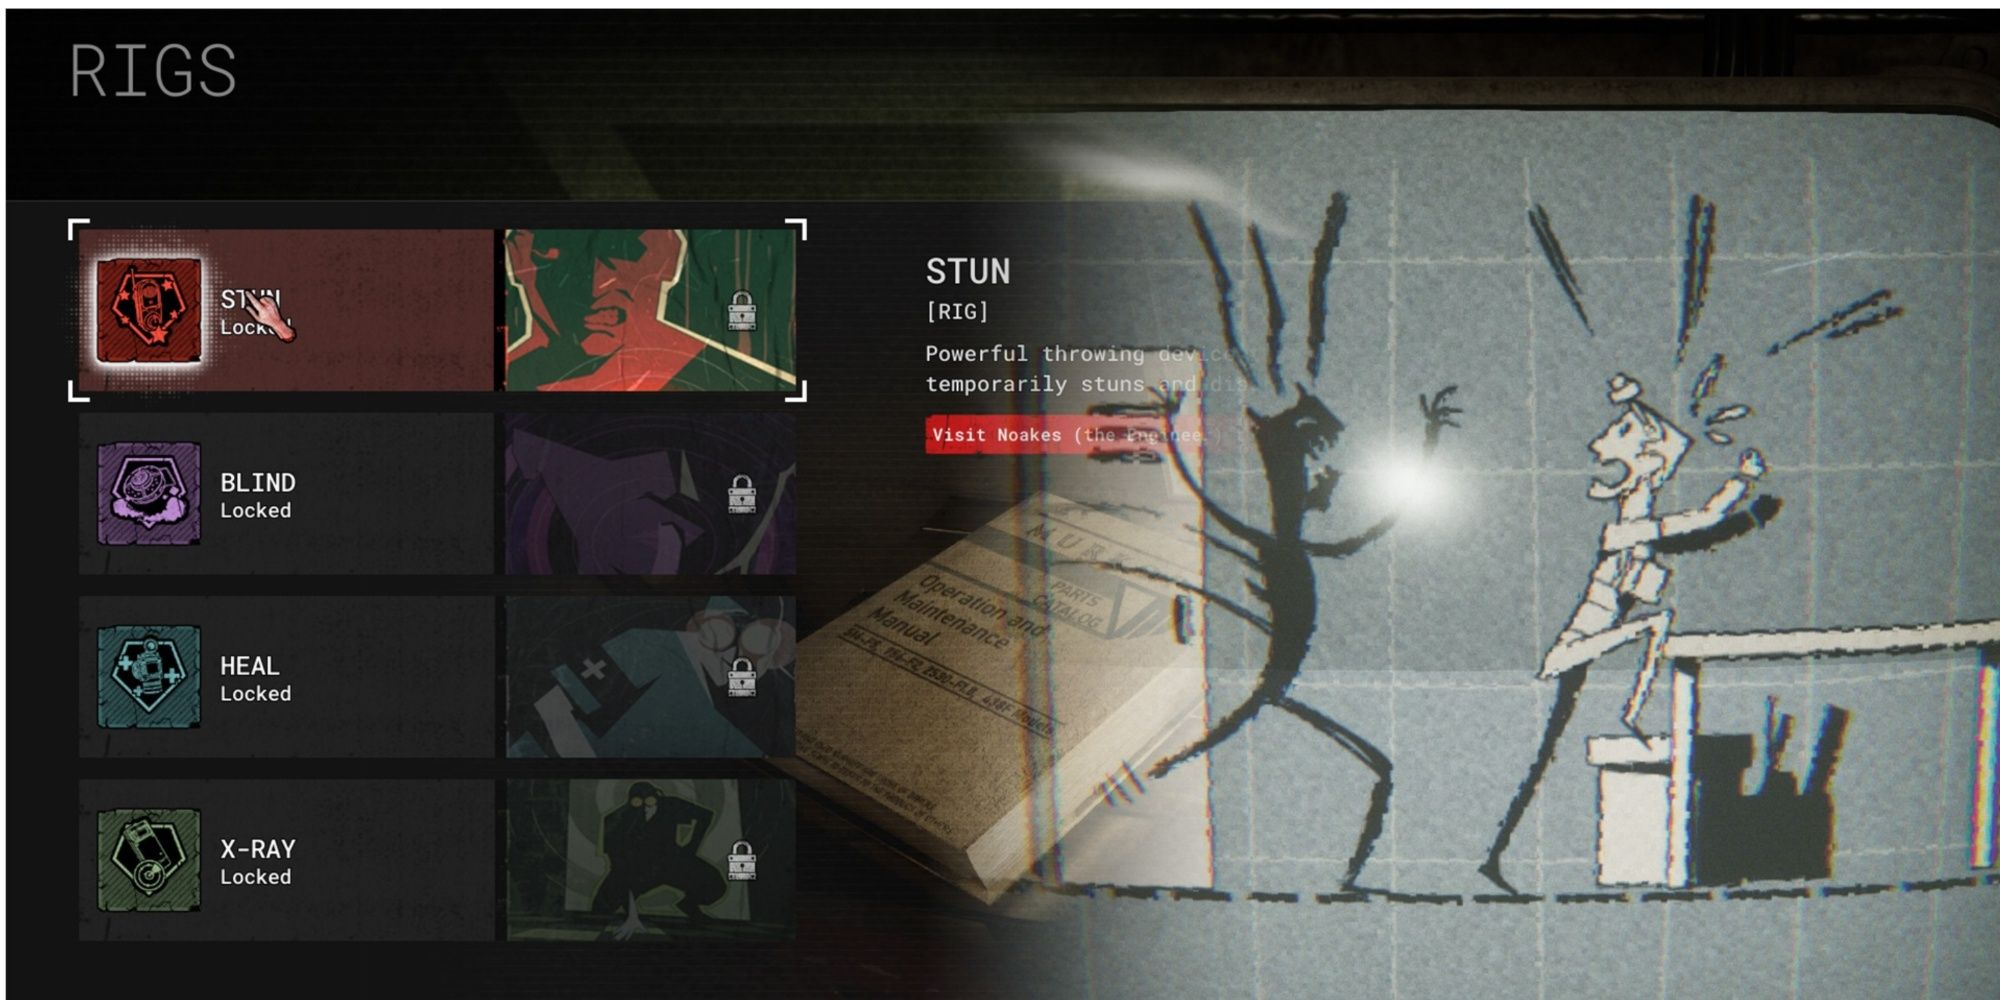 RIGS menu in The Outlast Trials